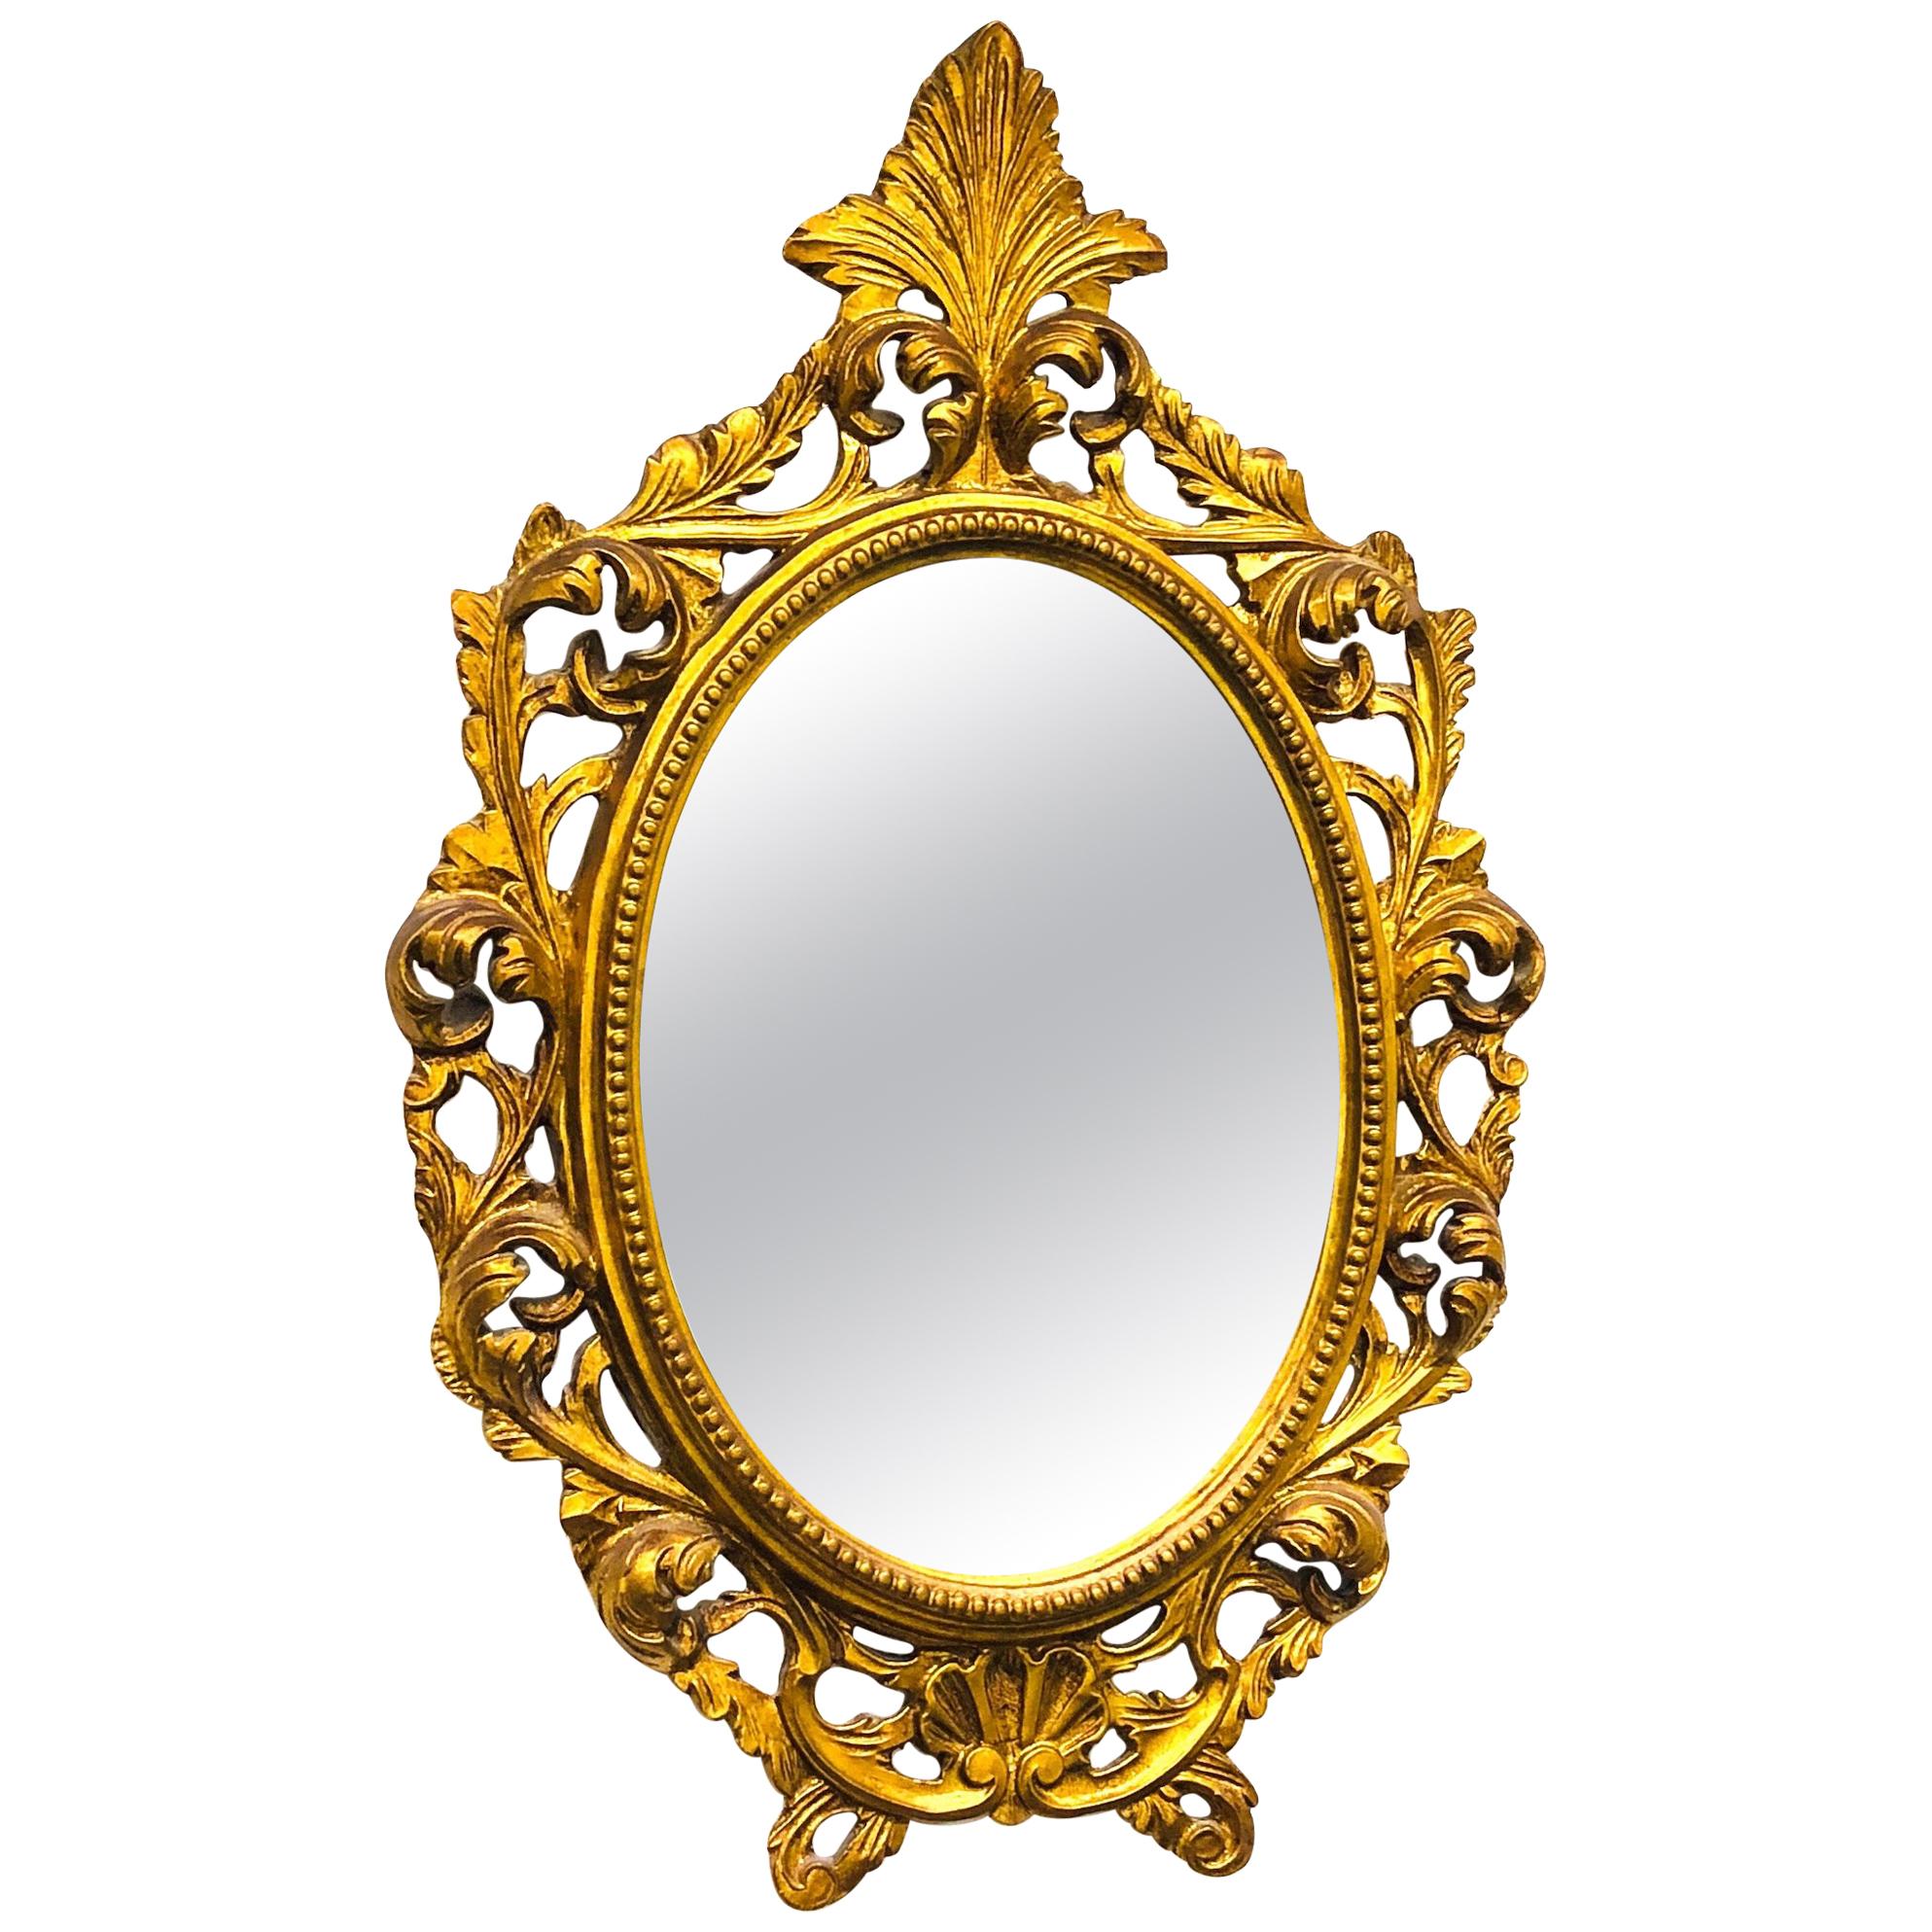 Mirror Hollywood Regency Style Gilded Wood Vintage, Italy, 1960s